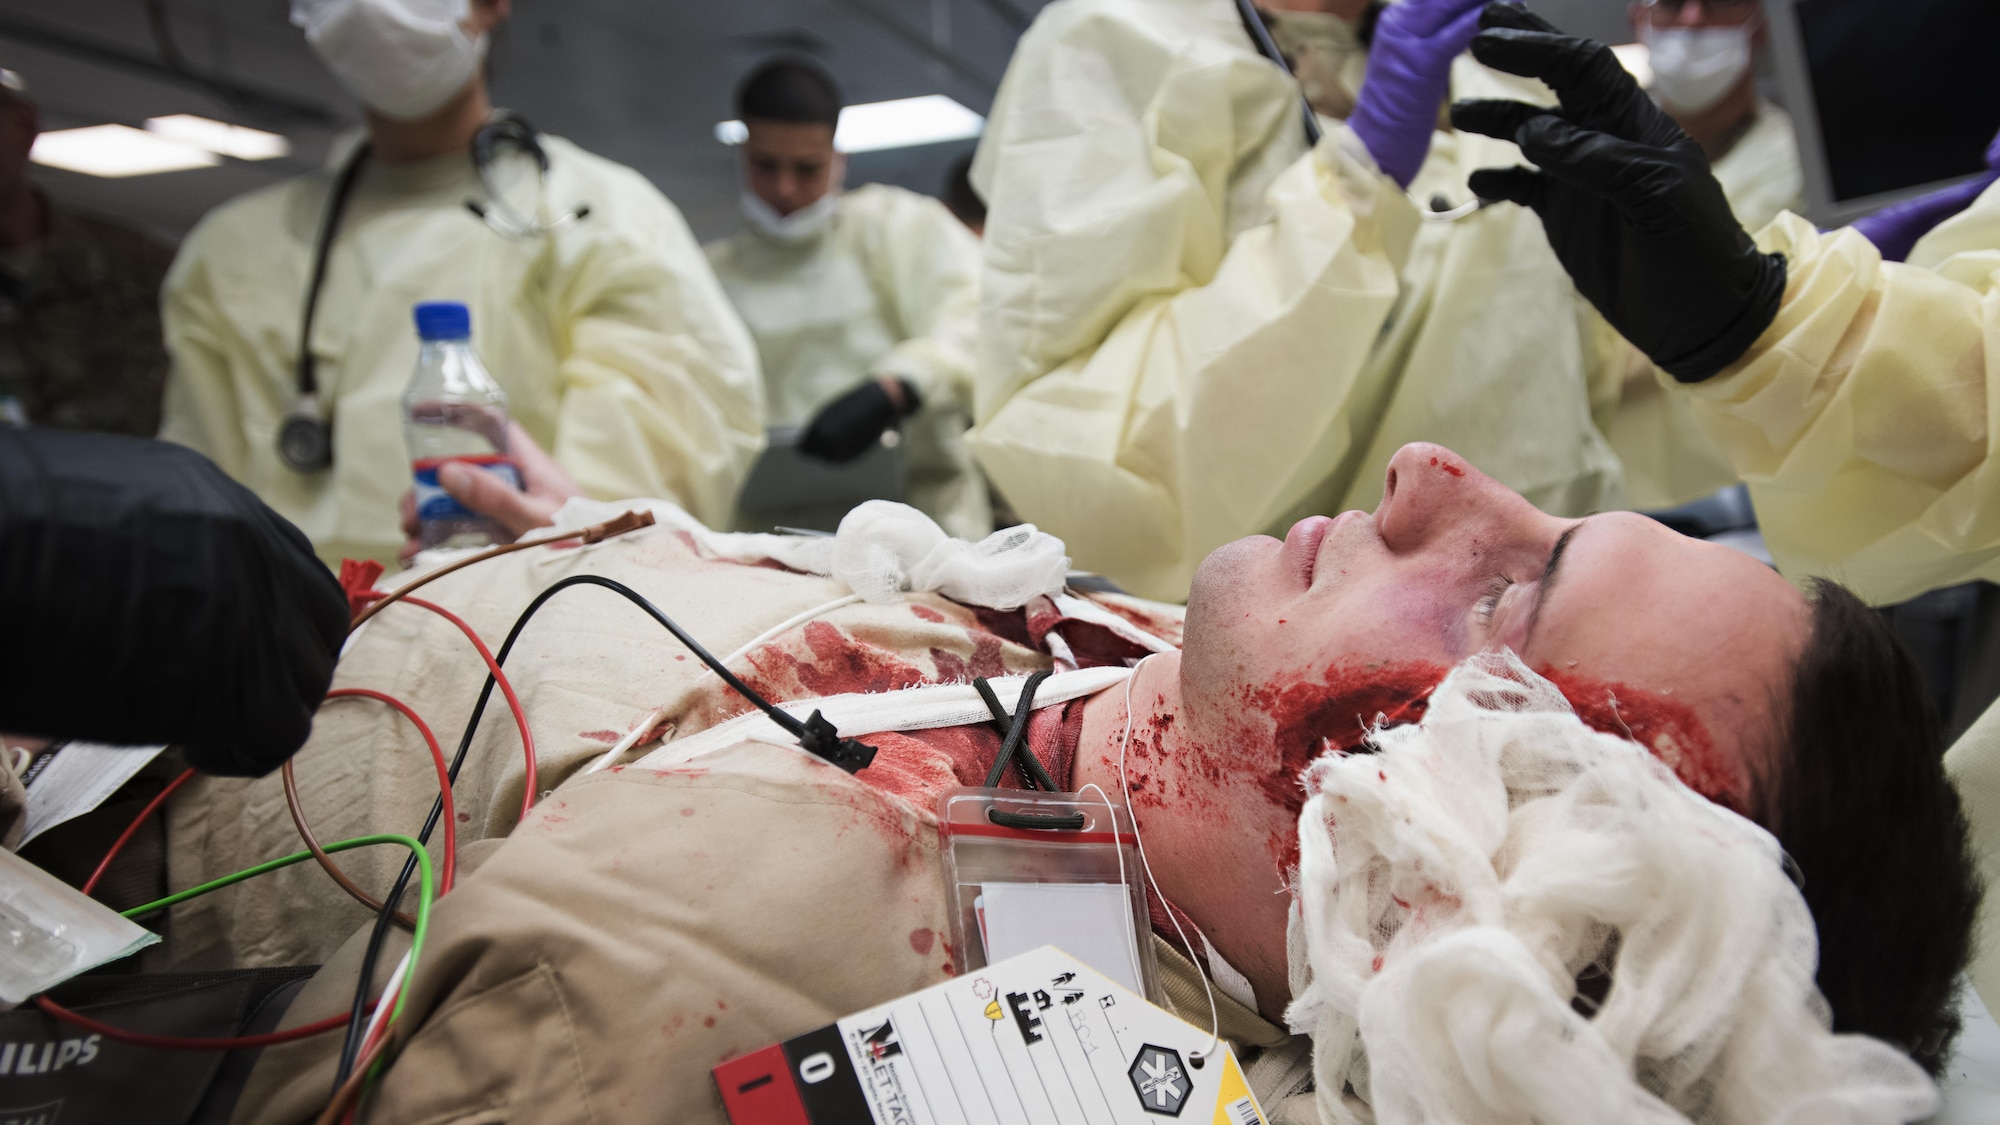 U.S. Army Sgt. Seth Pilkington, 233rd Military Police Company, acts as a patient during a mass casualty exercise Oct. 30, 2016 in the emergency room of the Craig Joint Theater Hospital, Bagram Airfield, Afghanistan. Patients were medically evacuated from the embassy in Kabul for the exercise. (U.S. Air Force photo by Staff Sgt. Katherine Spessa)
